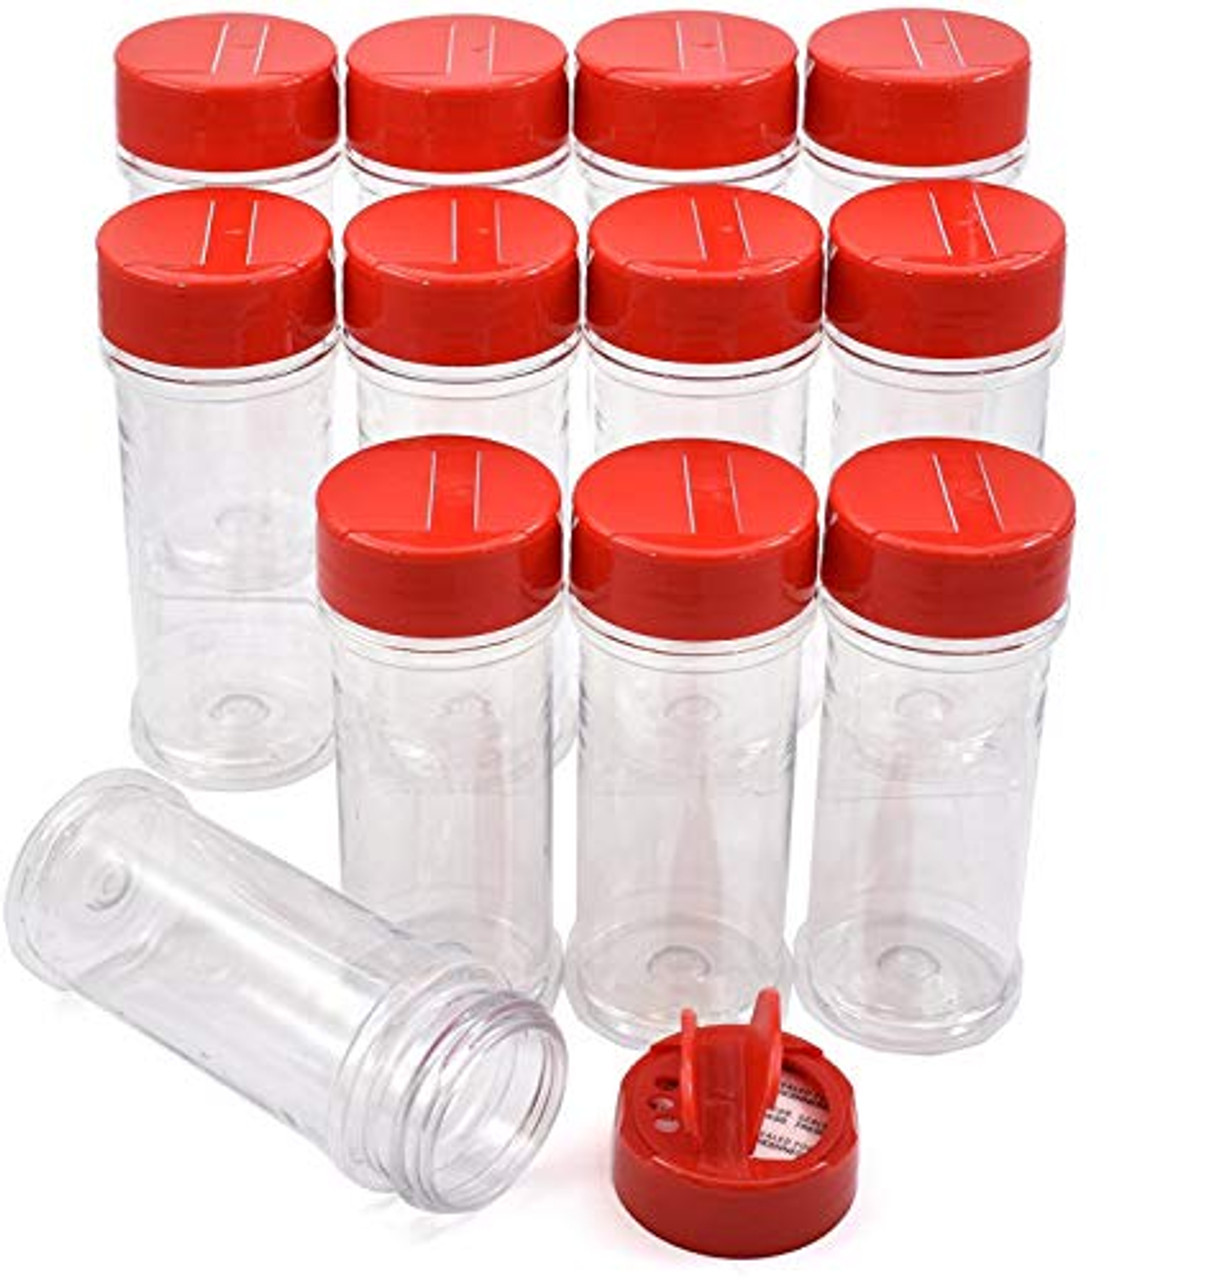 Glass Bottles - Reliable Glass Bottles, Jars, Containers